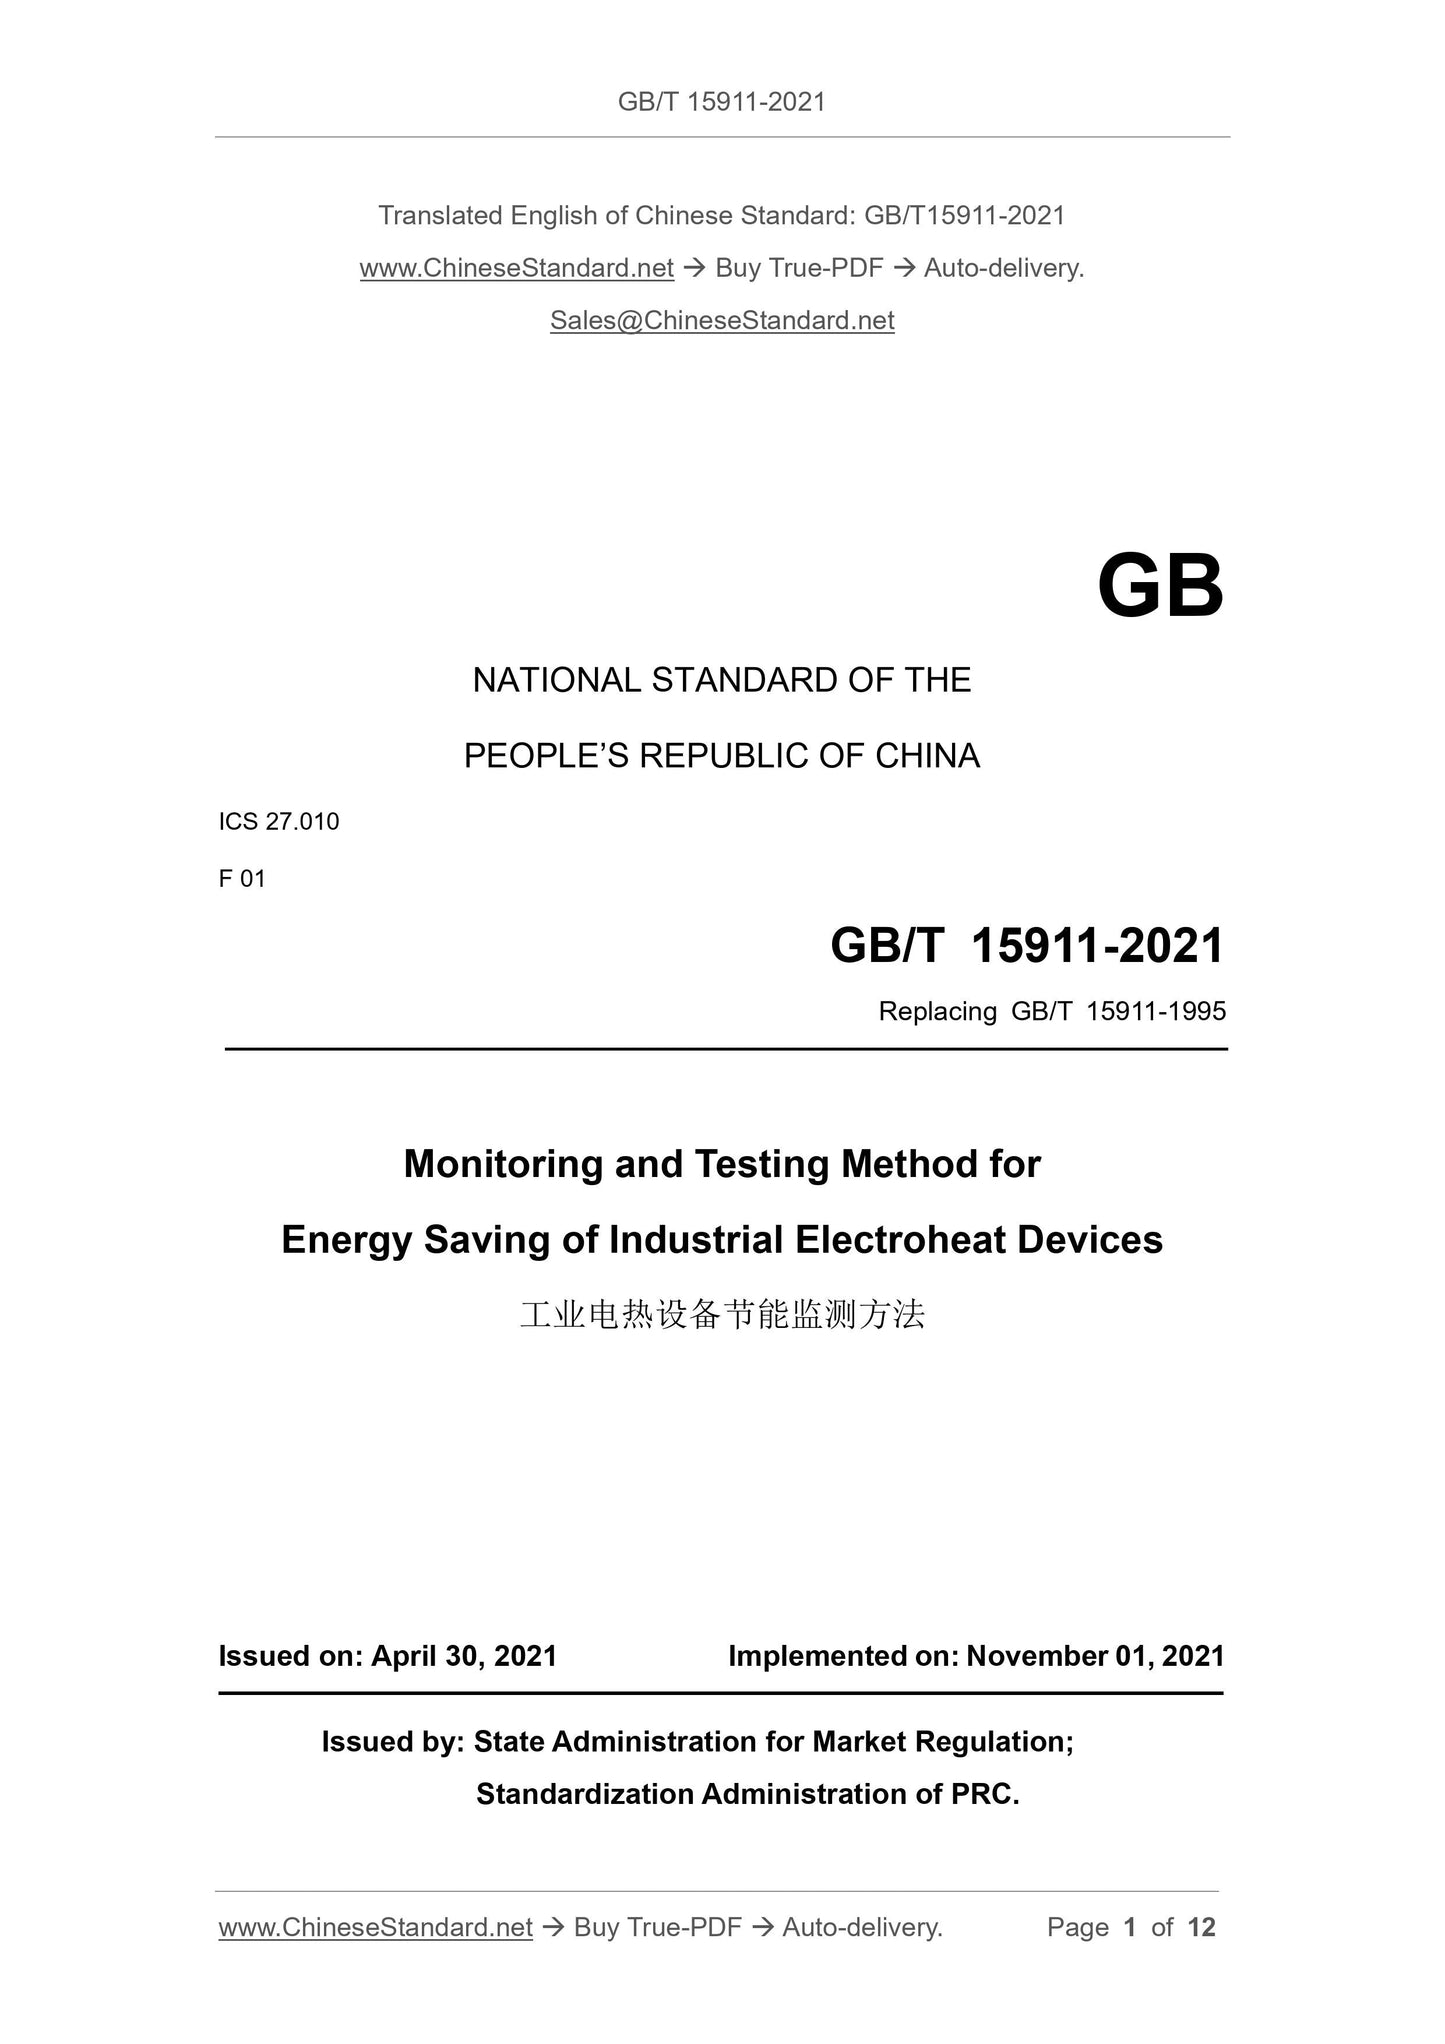 GB/T 15911-2021 Page 1